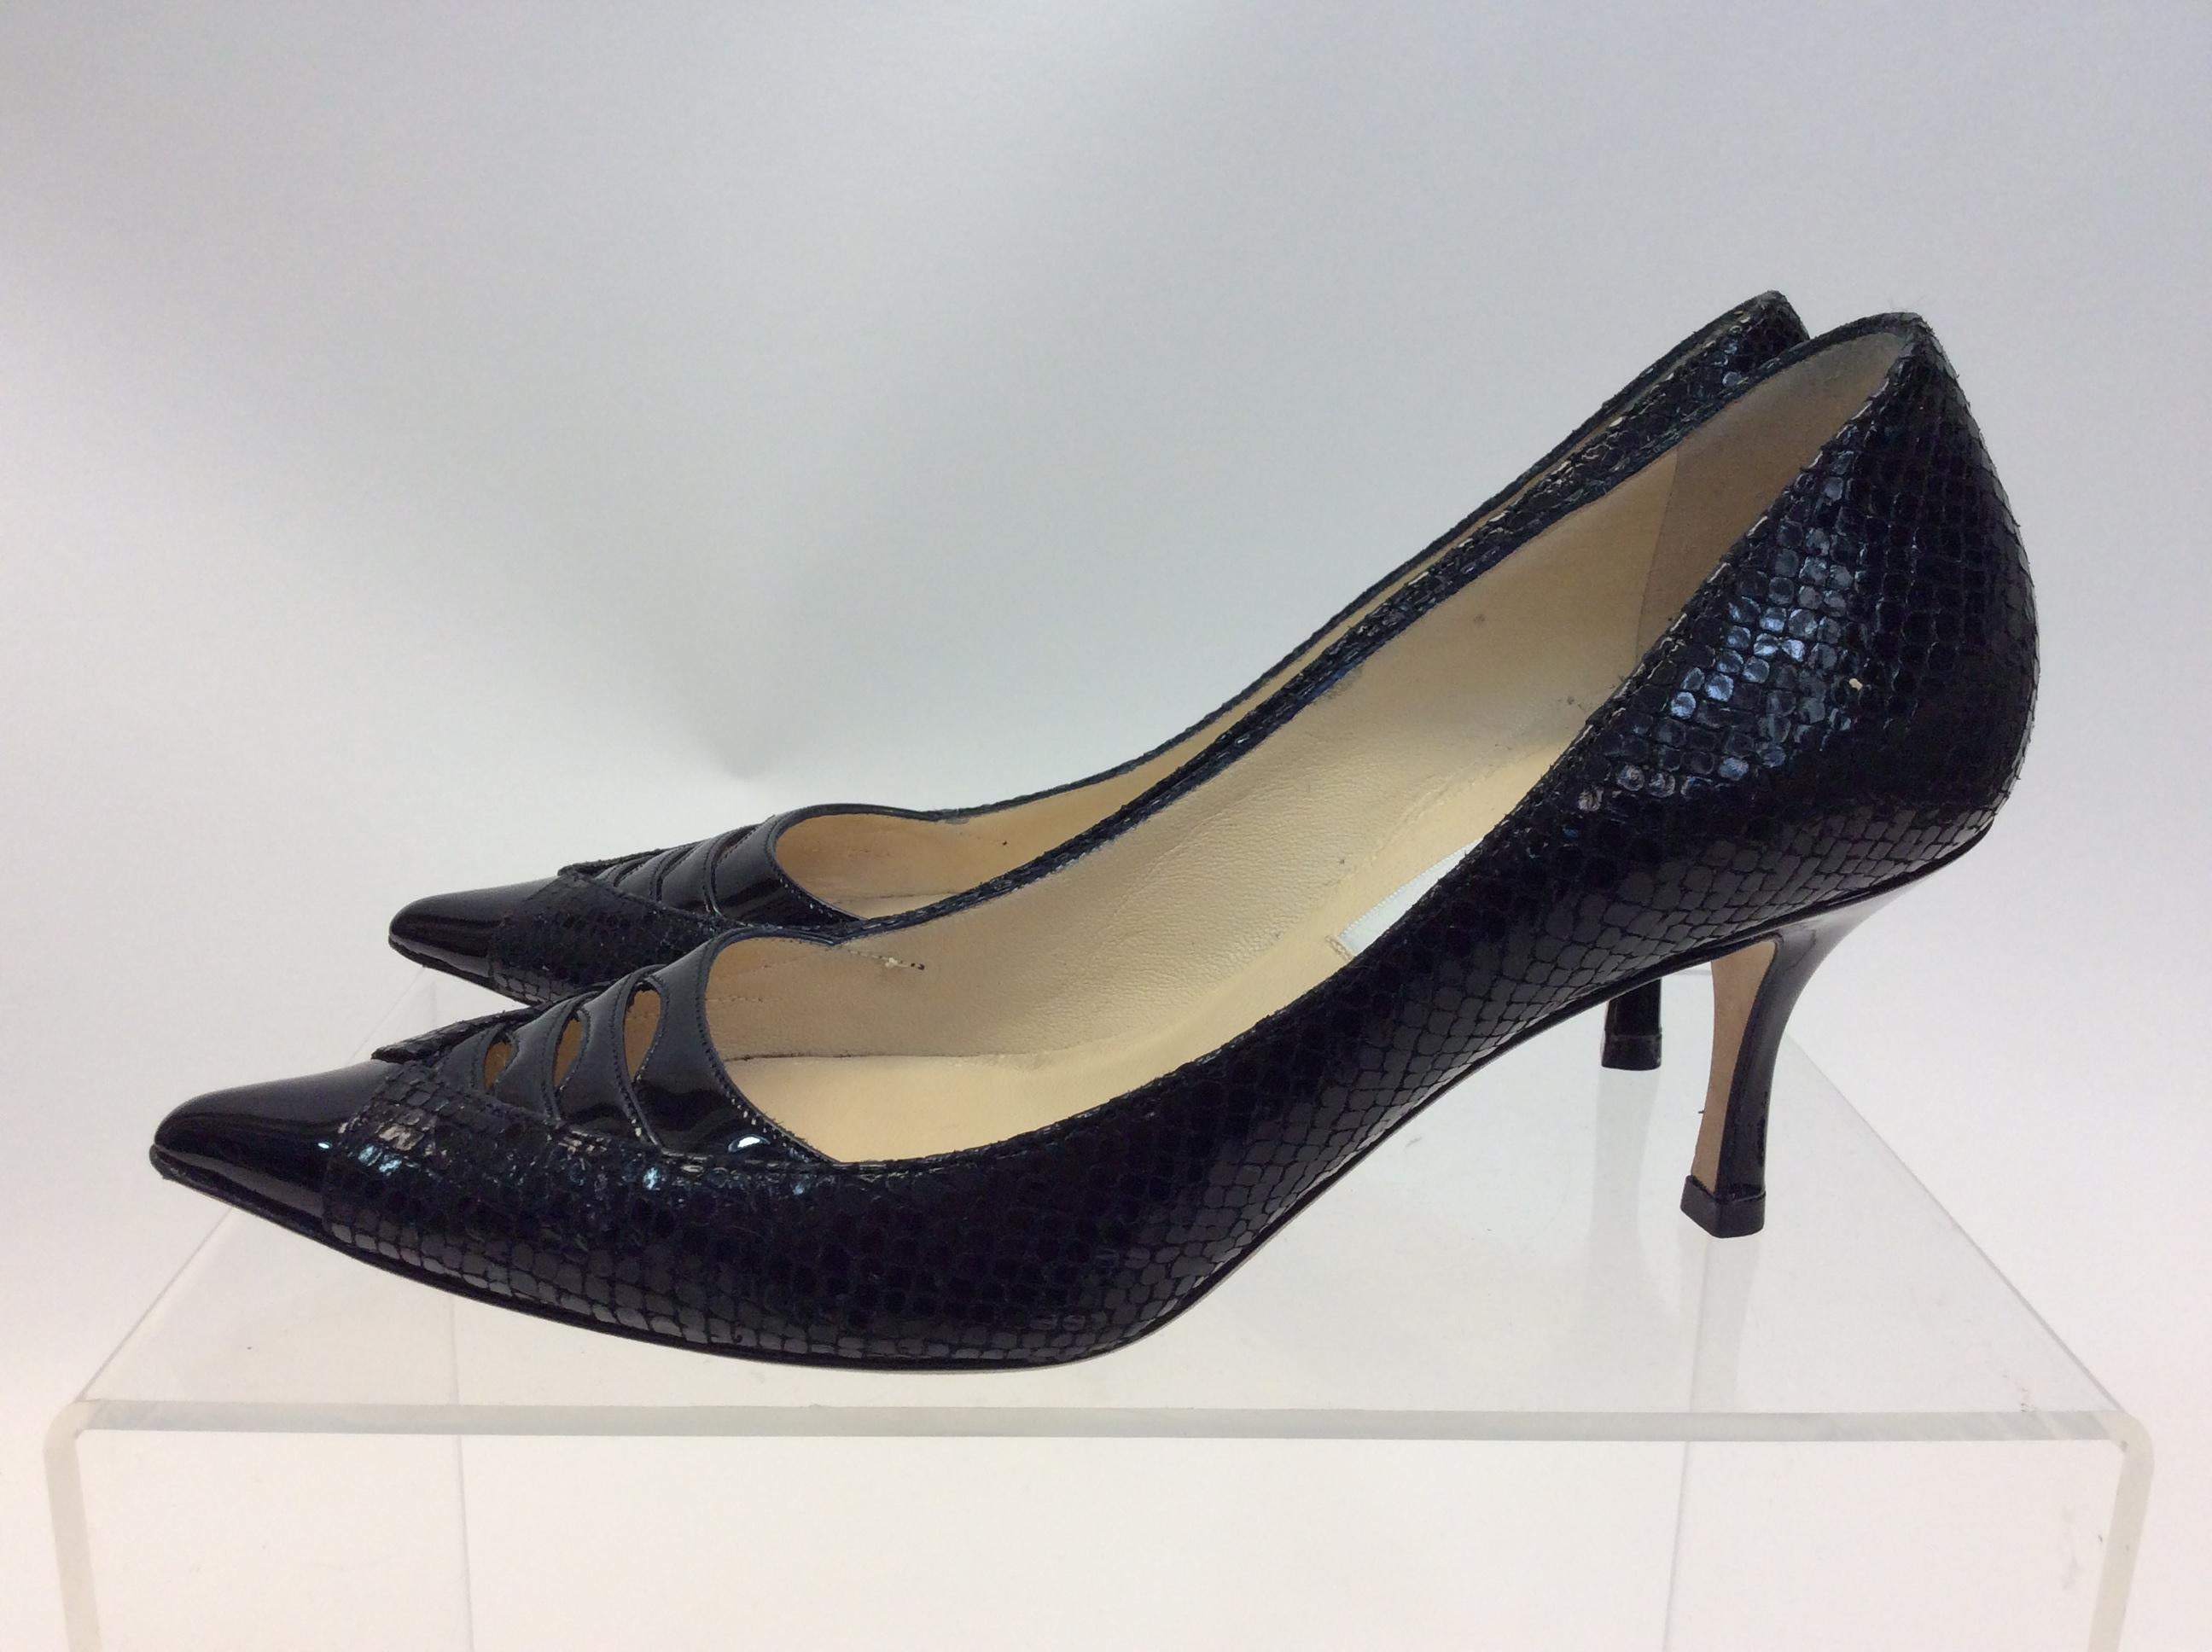 Jimmy Choo Black Skin and Patent Leather Heels
$299
Made in Italy
Size 36
2.5